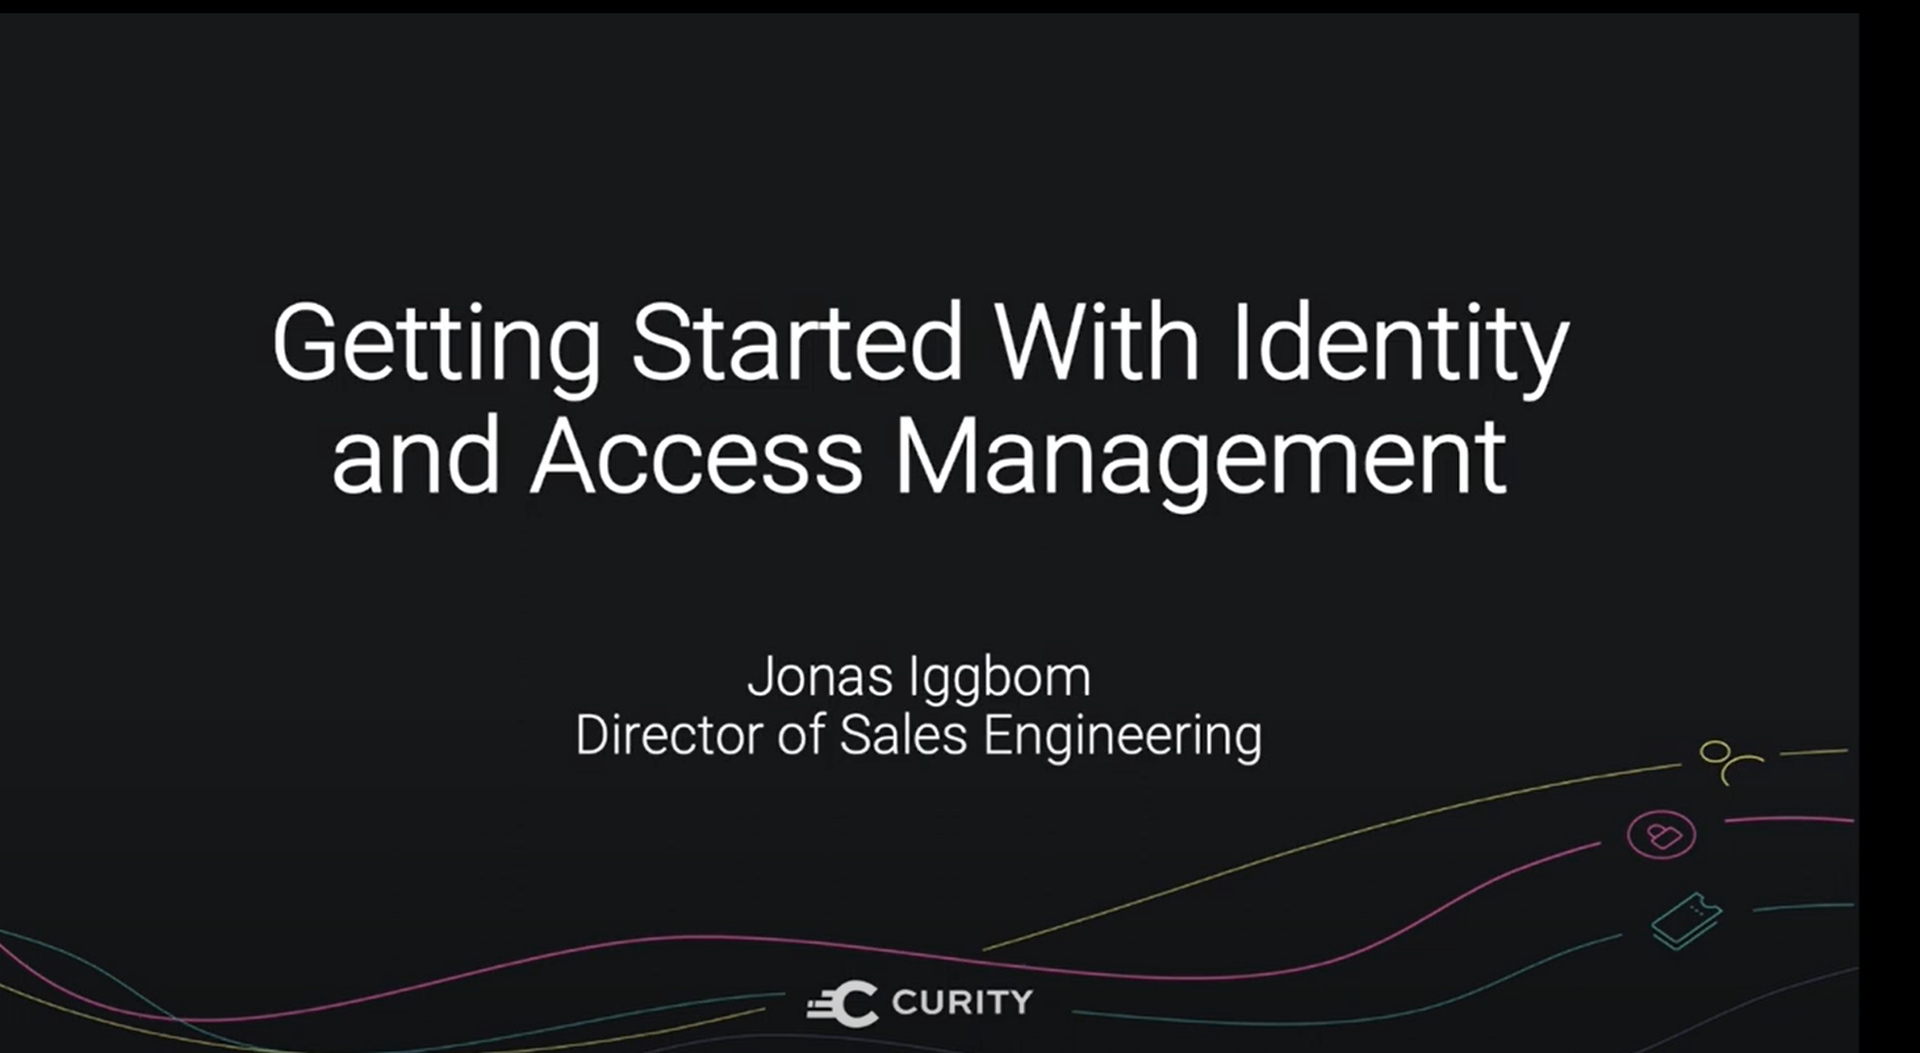 Getting Started with Identity and Access Management